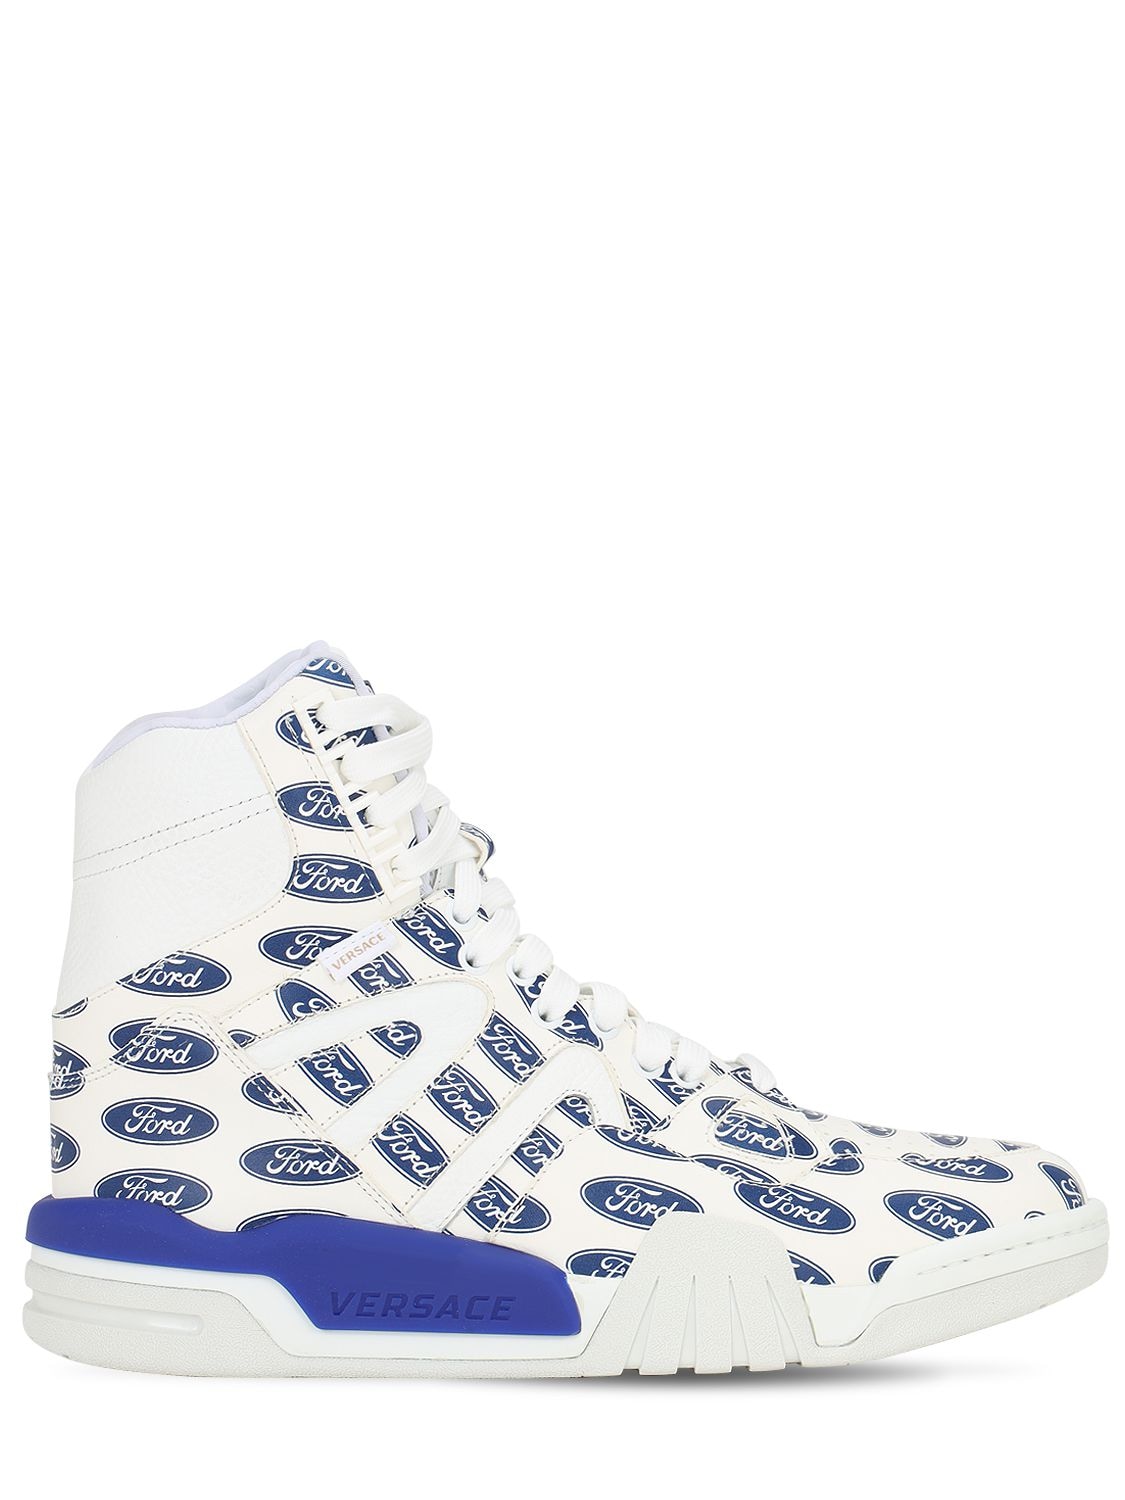 Logo Printed Leather High Top Sneakers